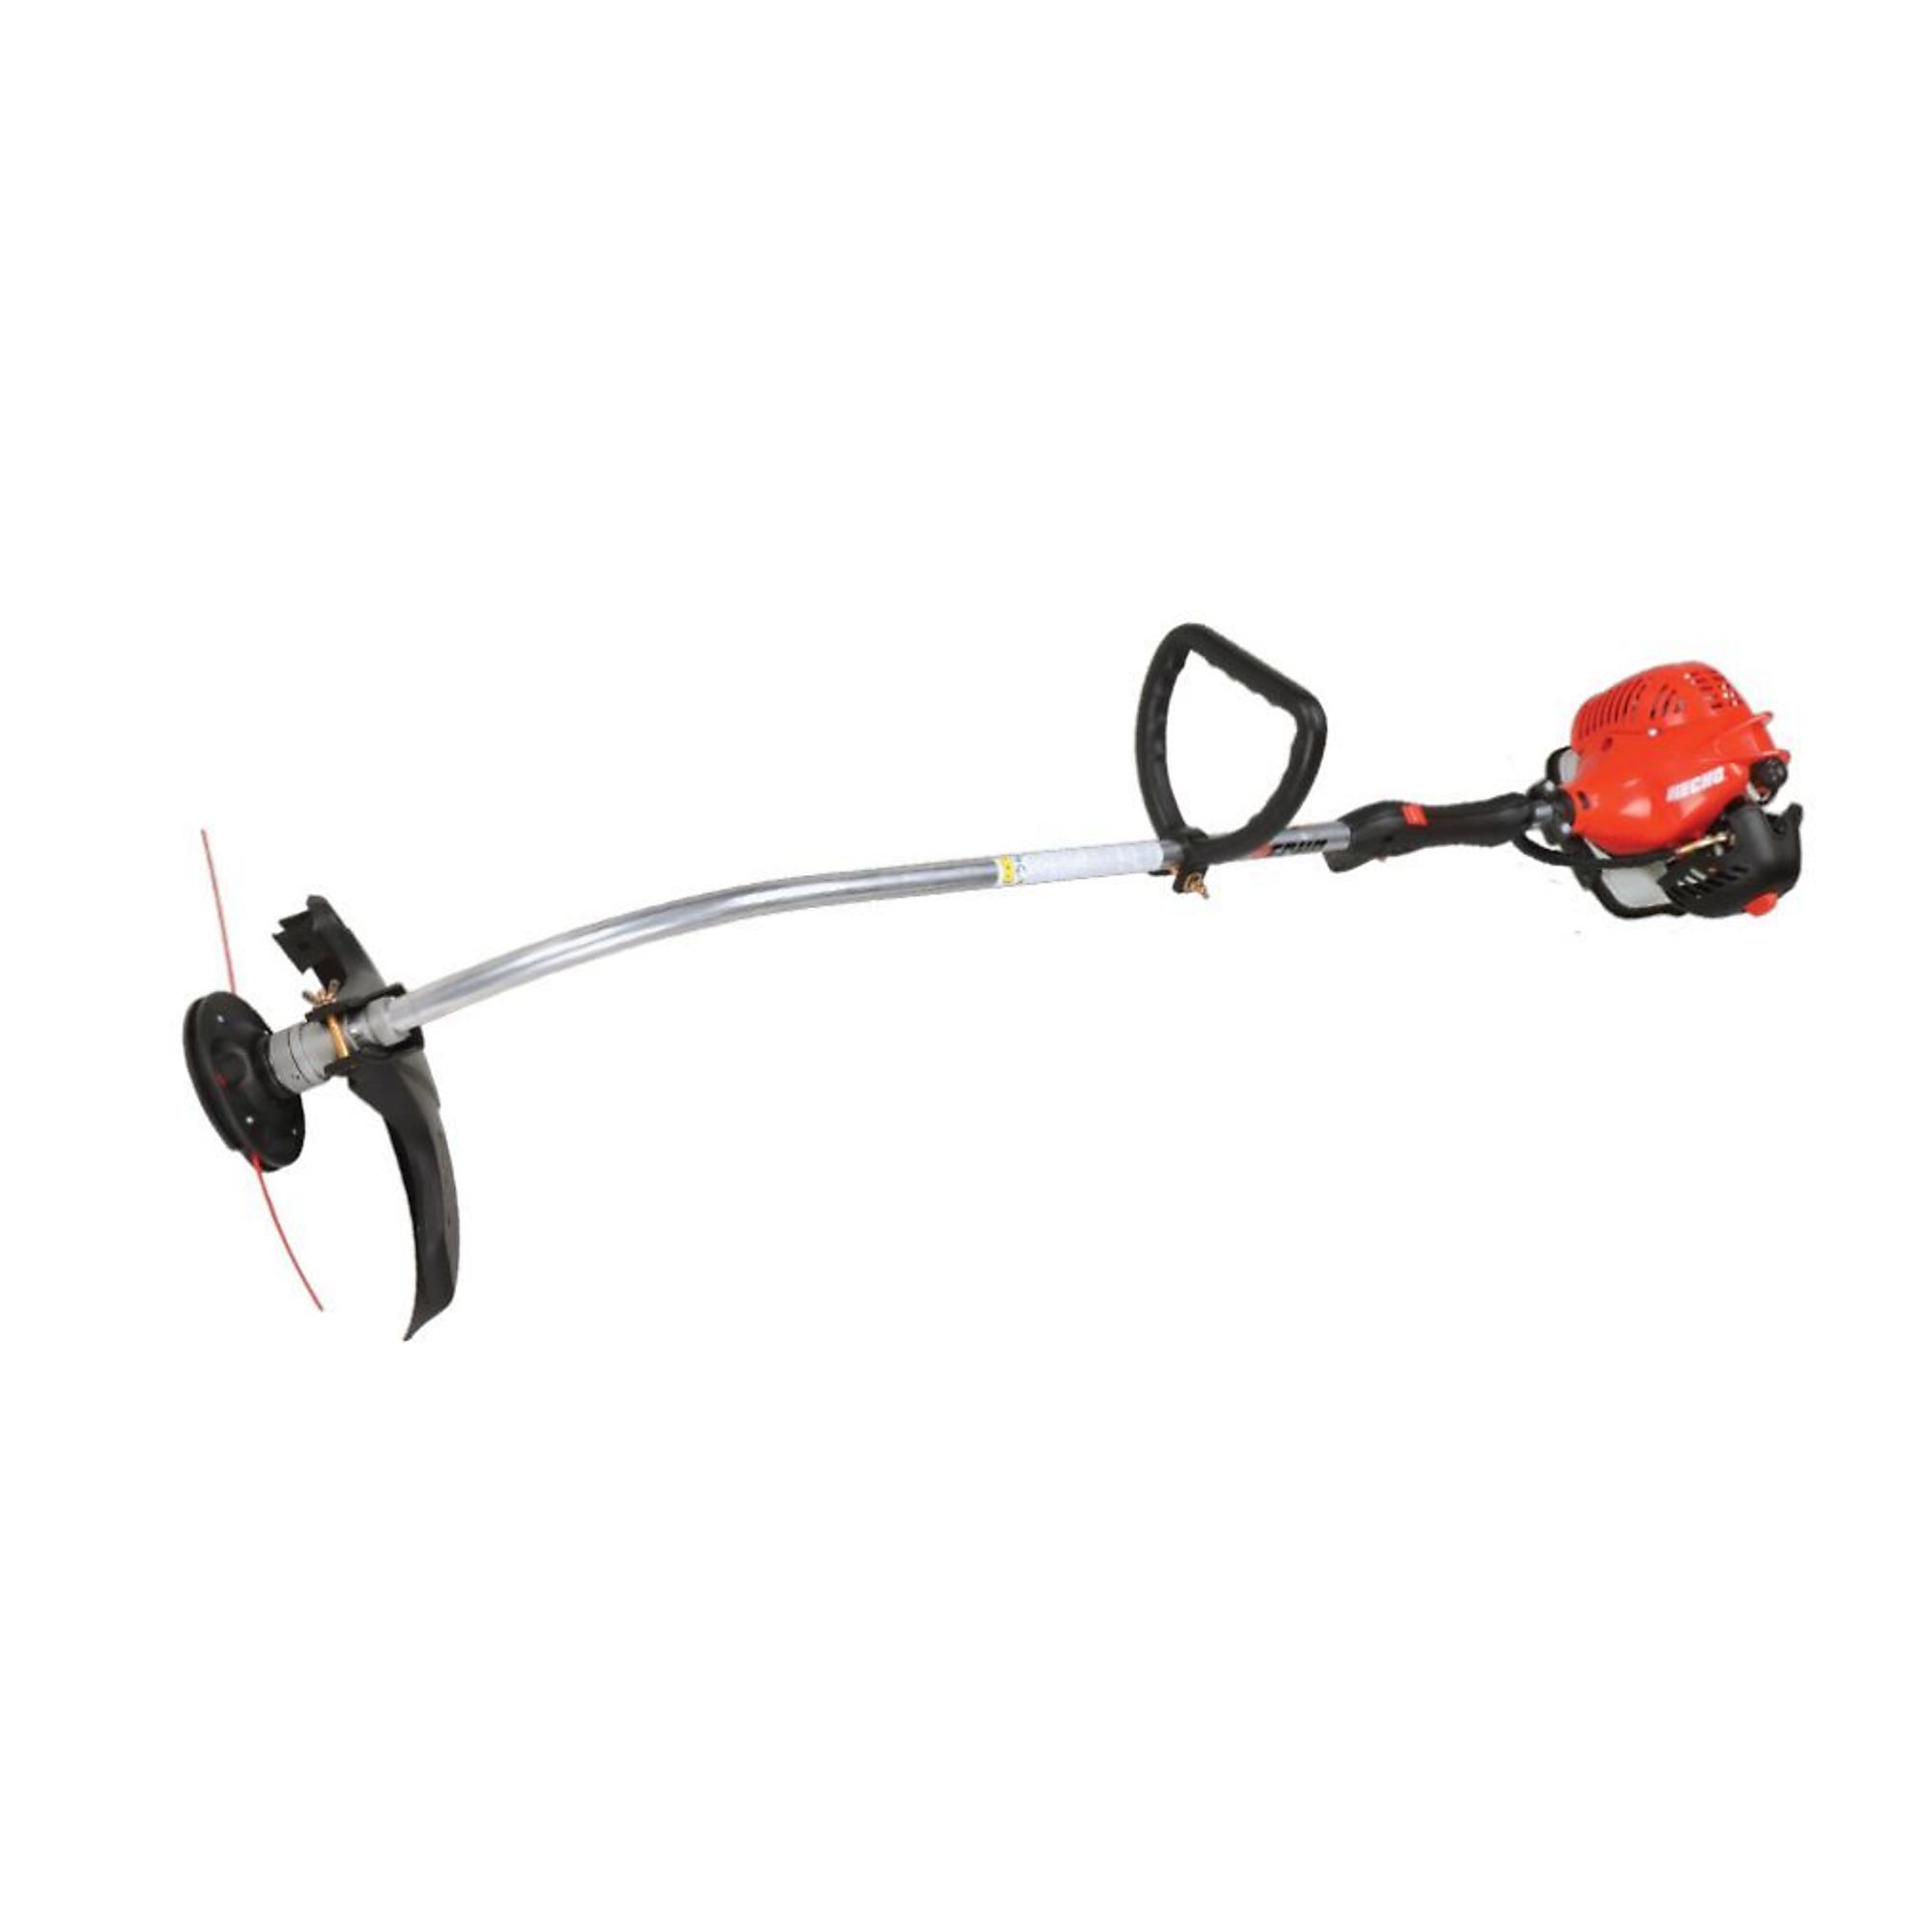 ECHO, Curved Shaft String Trimmer, Primary Power Source Gas, Engine Displacement 21.2 cc, Model GT-225